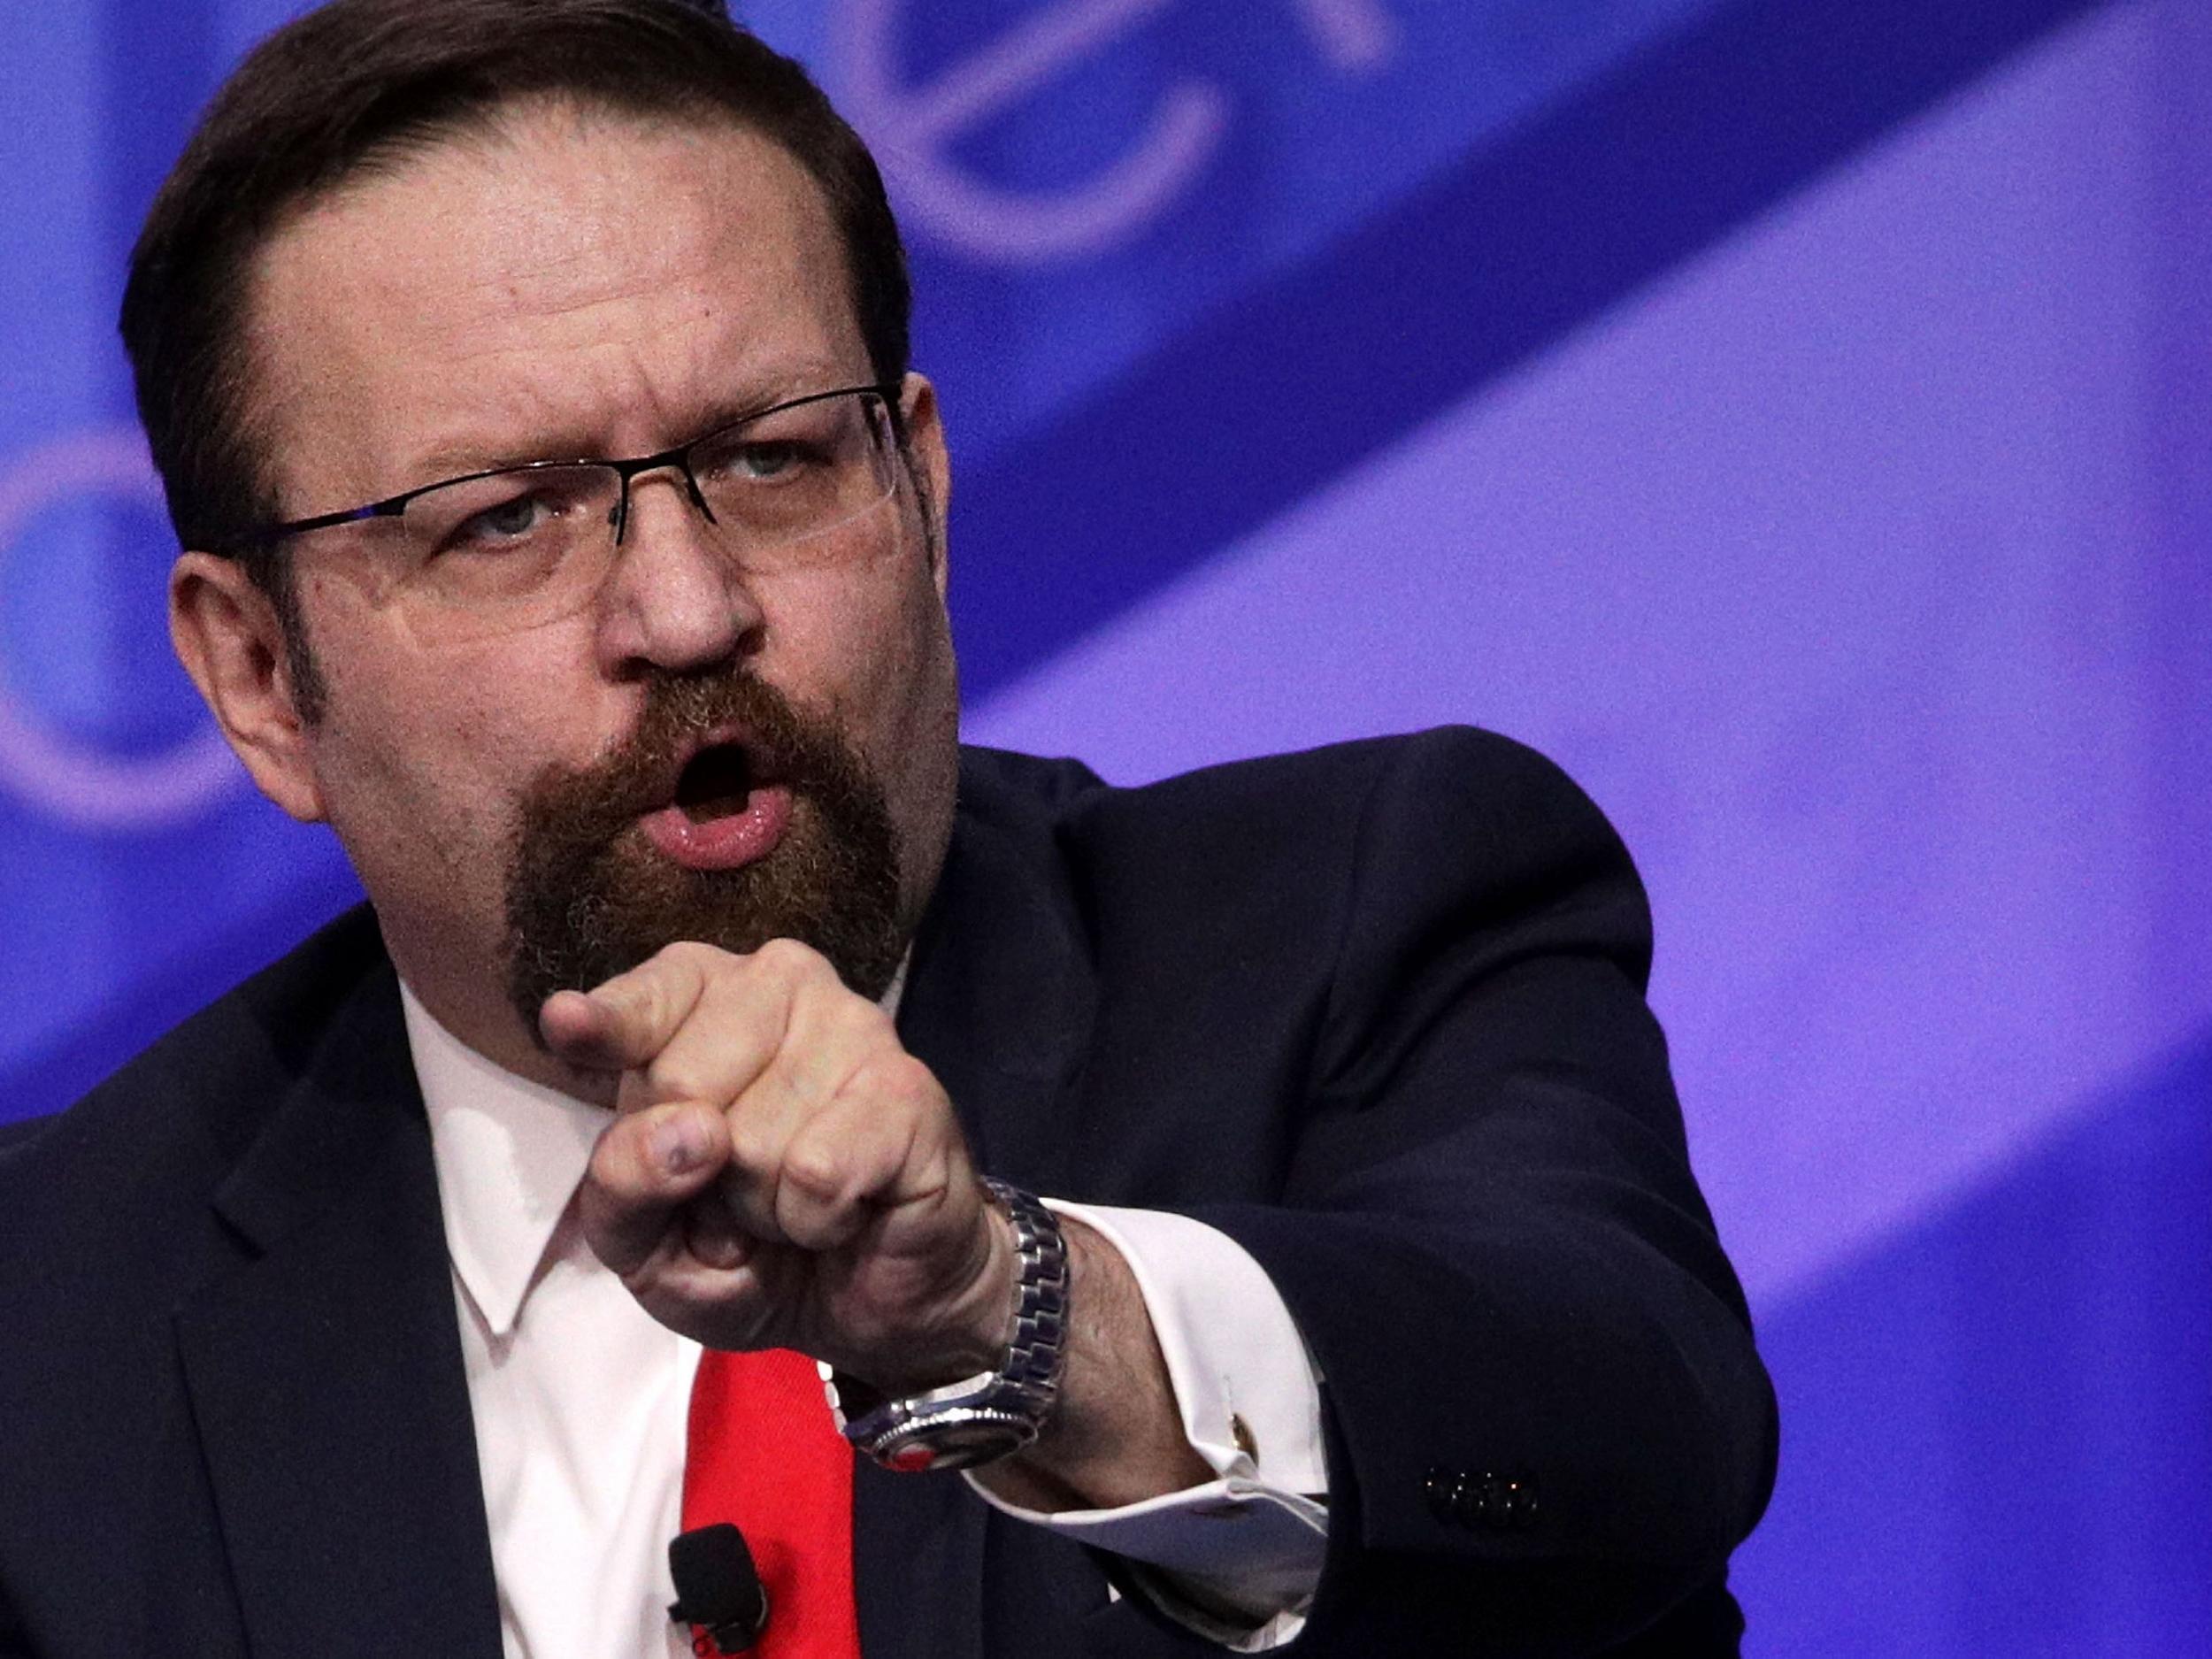 Mr Gorka, who regularly appeared on cable news shows to promote President Trump’s policies, was a highly divisive, controversial individual in the Trump team